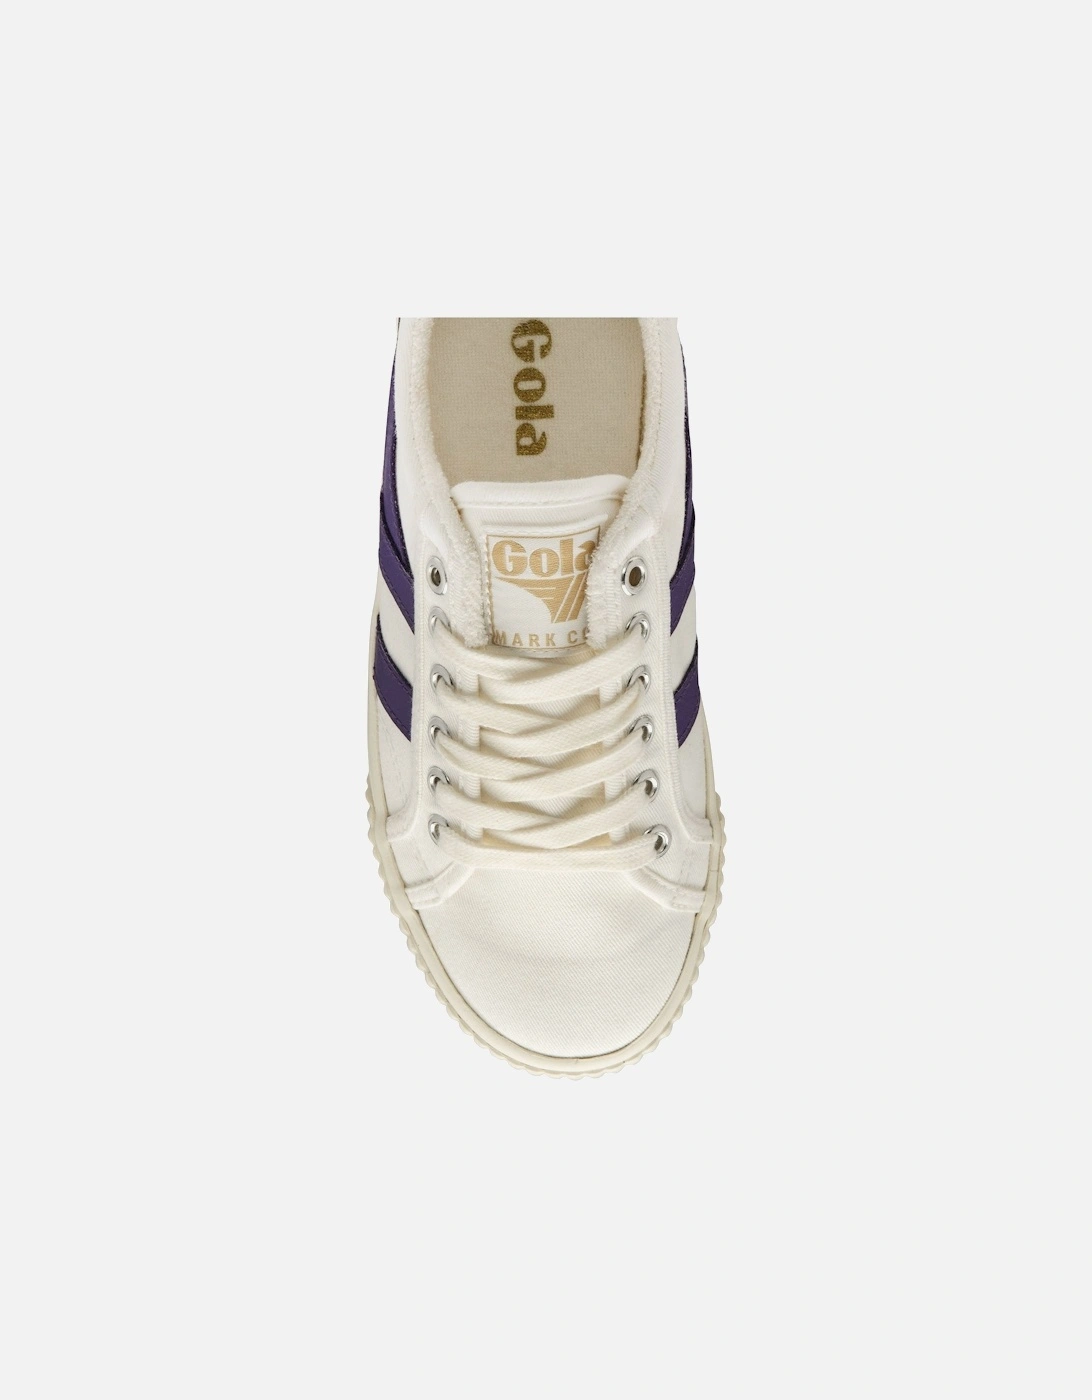 Womens Tennis Mark Cox Classic Trainers - White/Violet